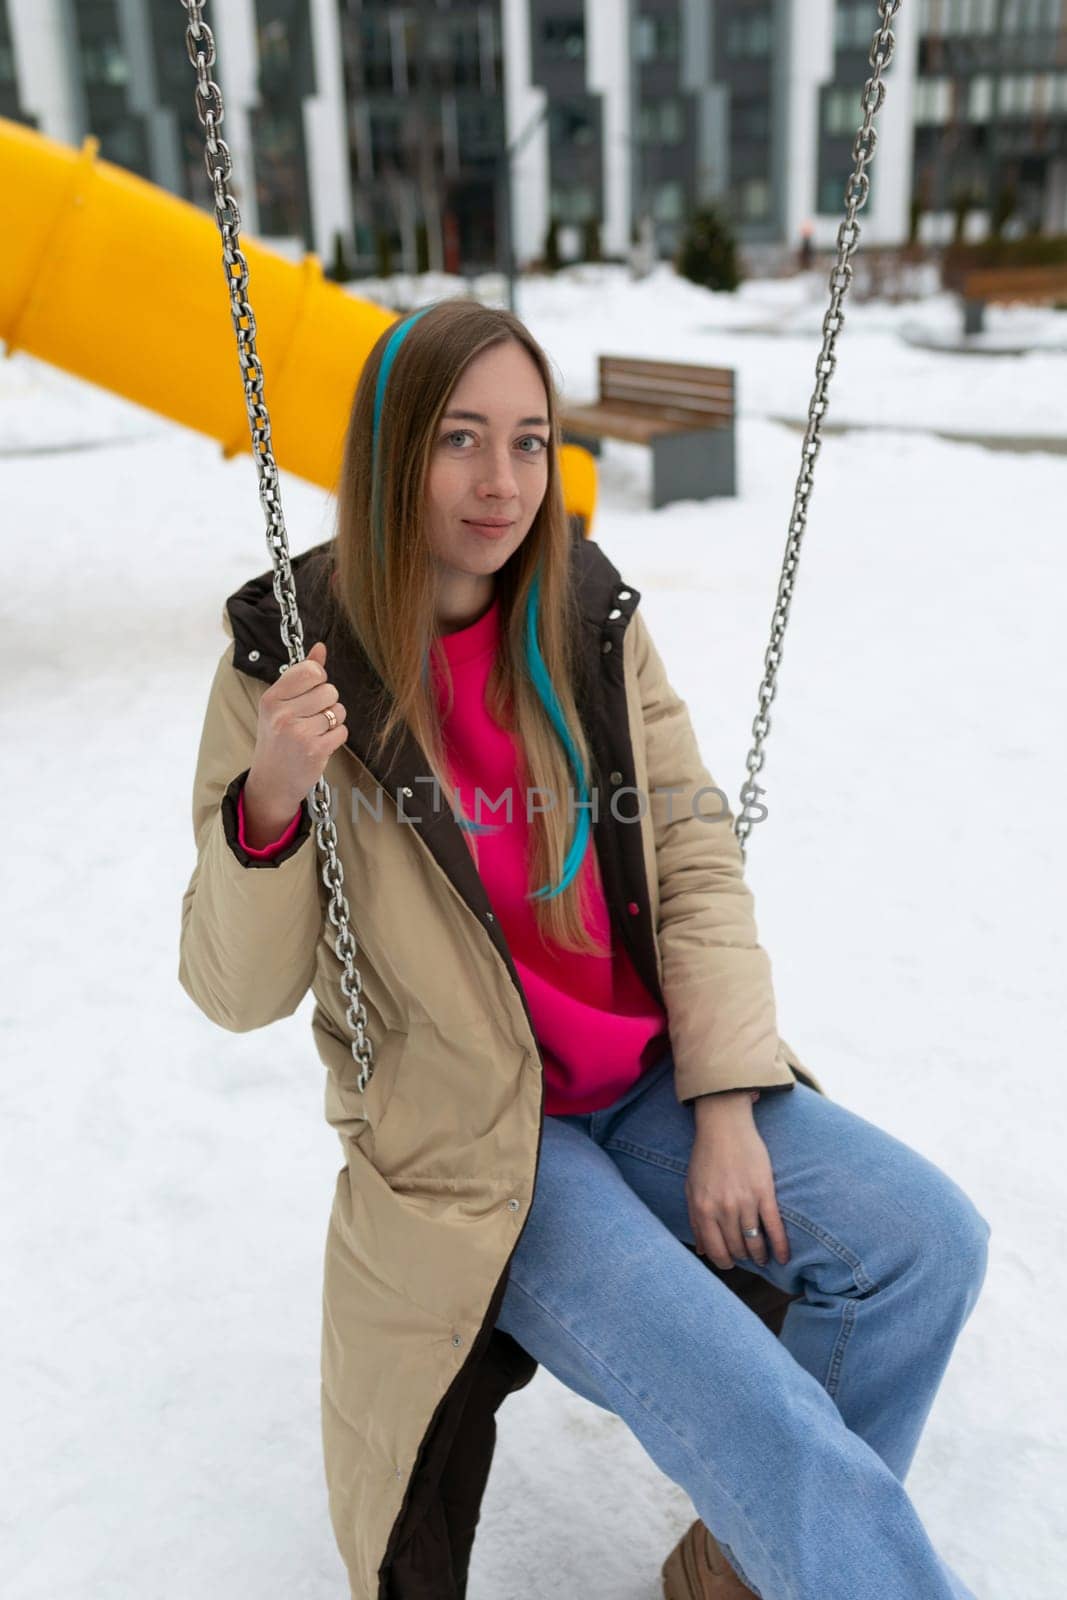 A woman is seated on a swing, swinging gently back and forth, in a snowy outdoor setting. Snow covers the ground and tree branches, creating a winter wonderland scene.